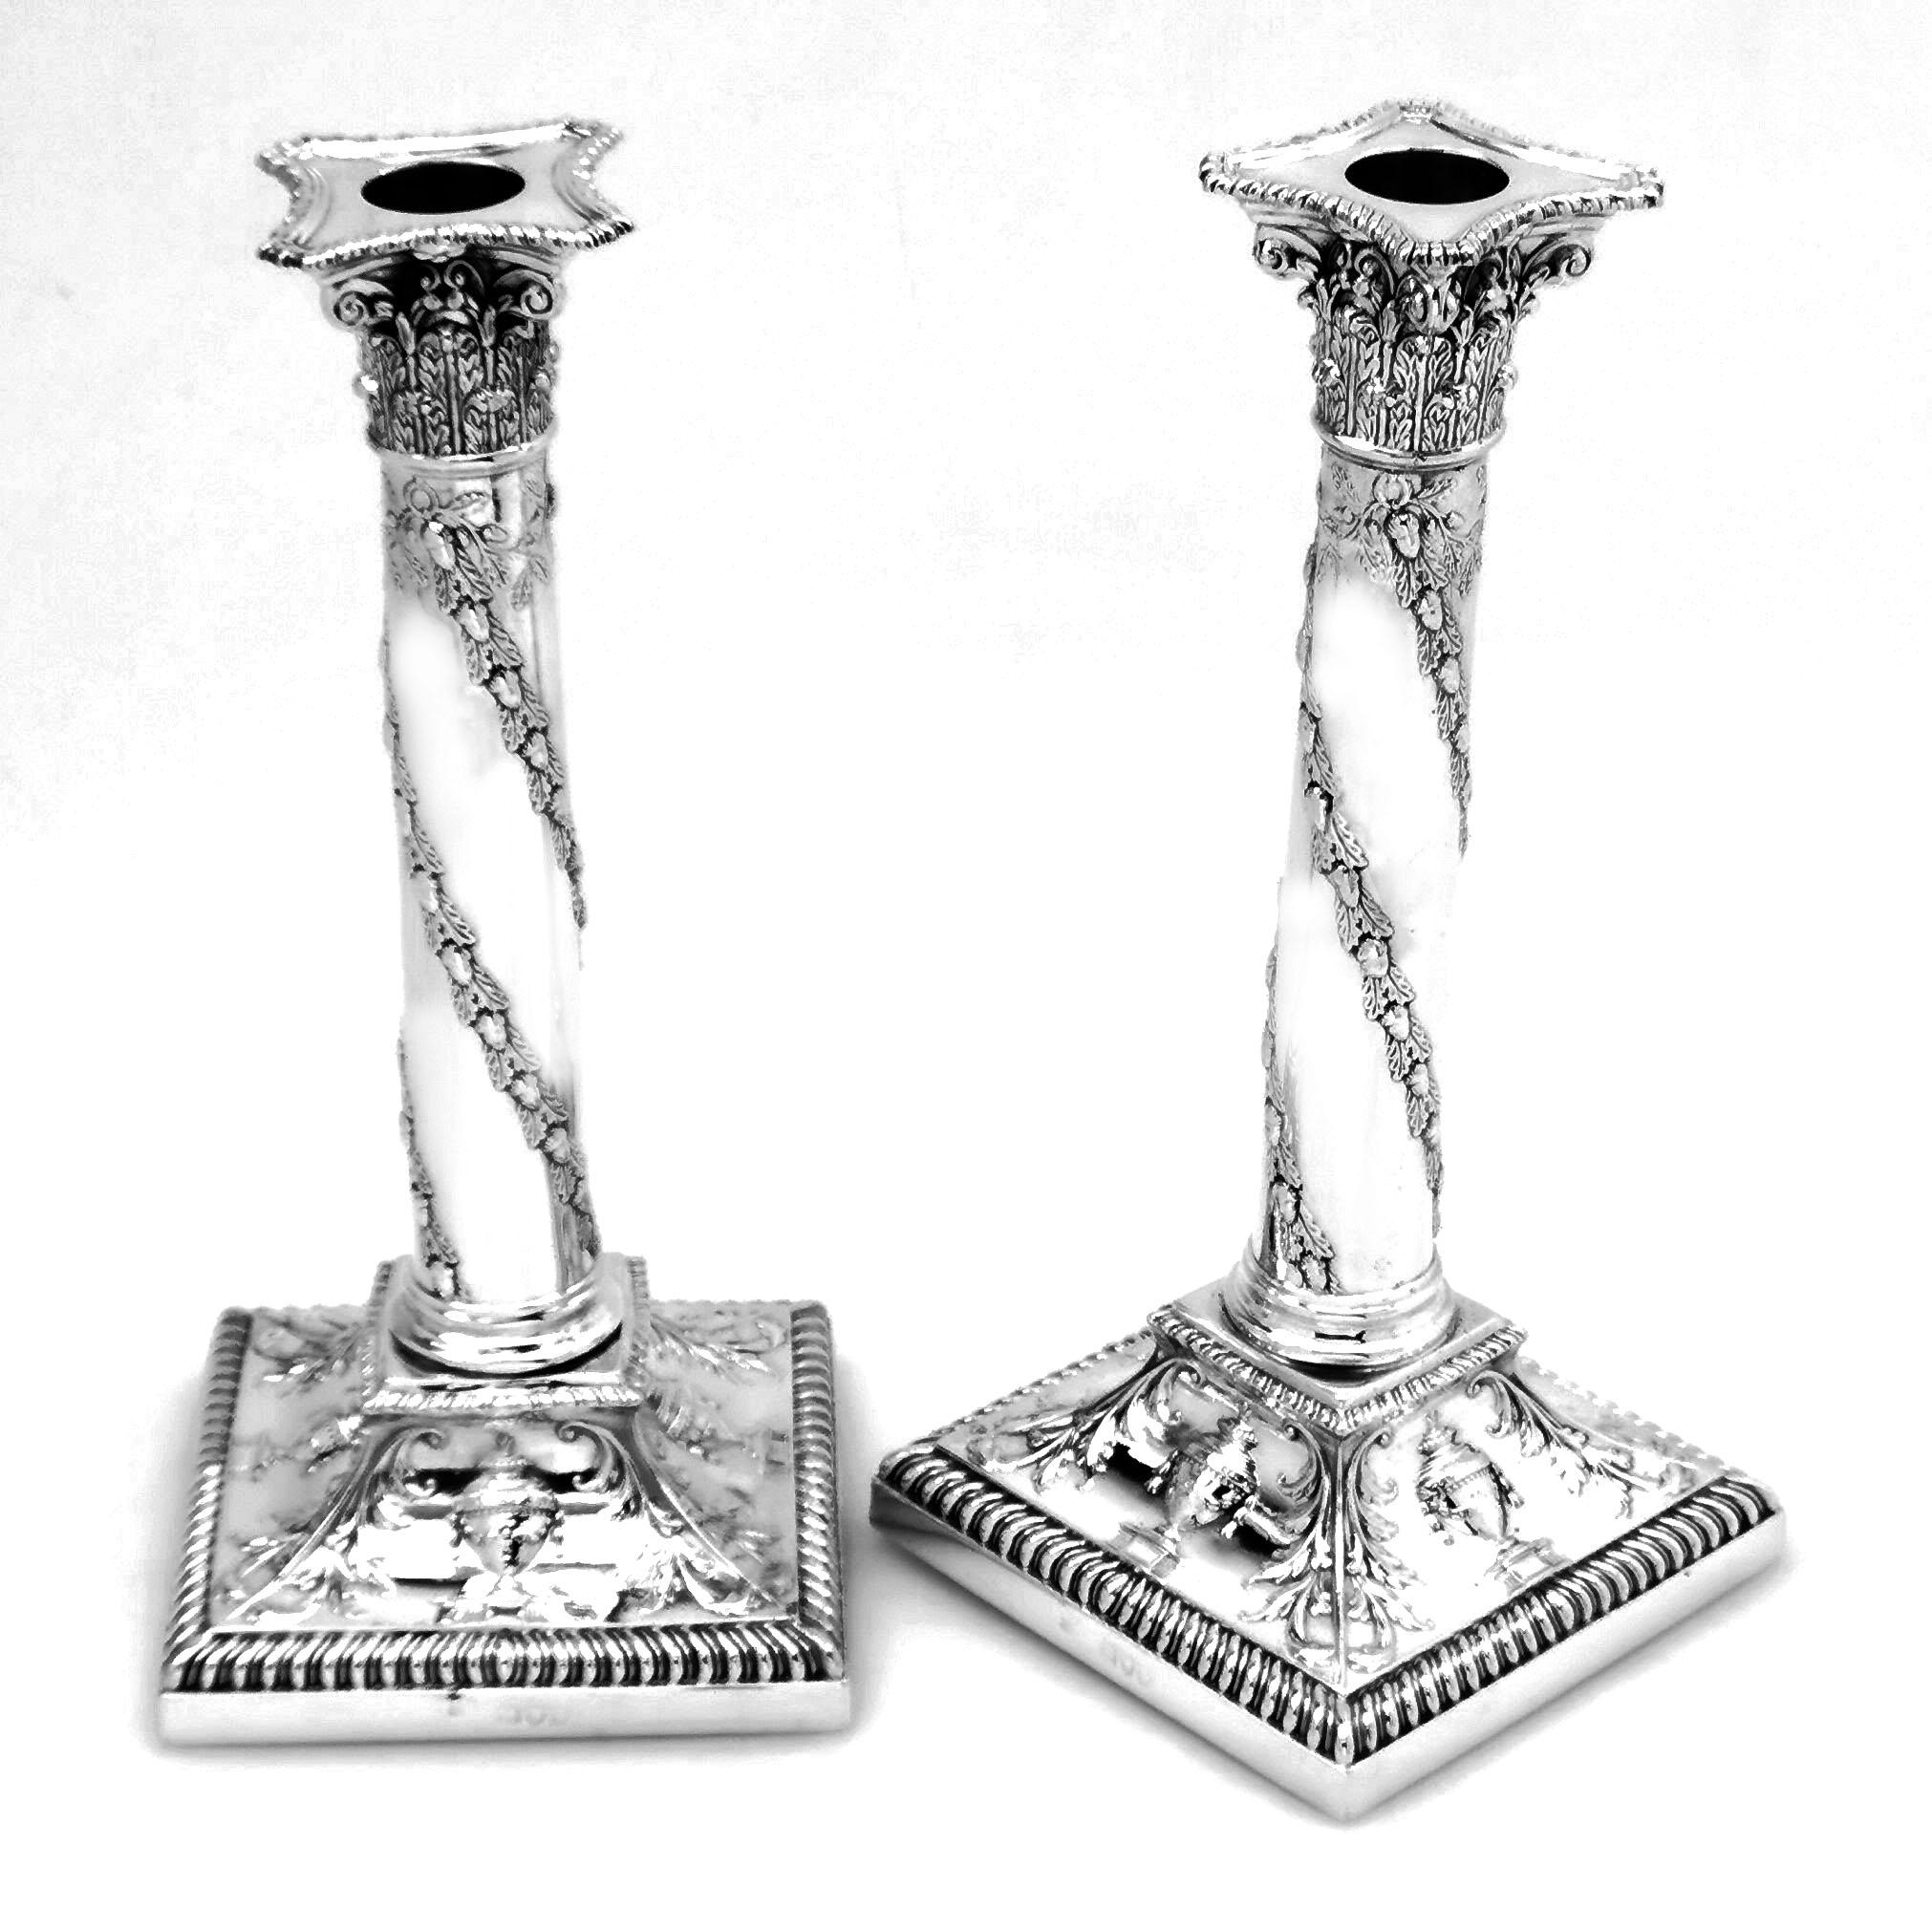 A lovely set of Antique Victorian sterling Silver Candlesticks with traditional Corinthian column capitals and chased vine leaf designs wrapping around the column. The square base of the Candlesticks is decorated with chased designs showing